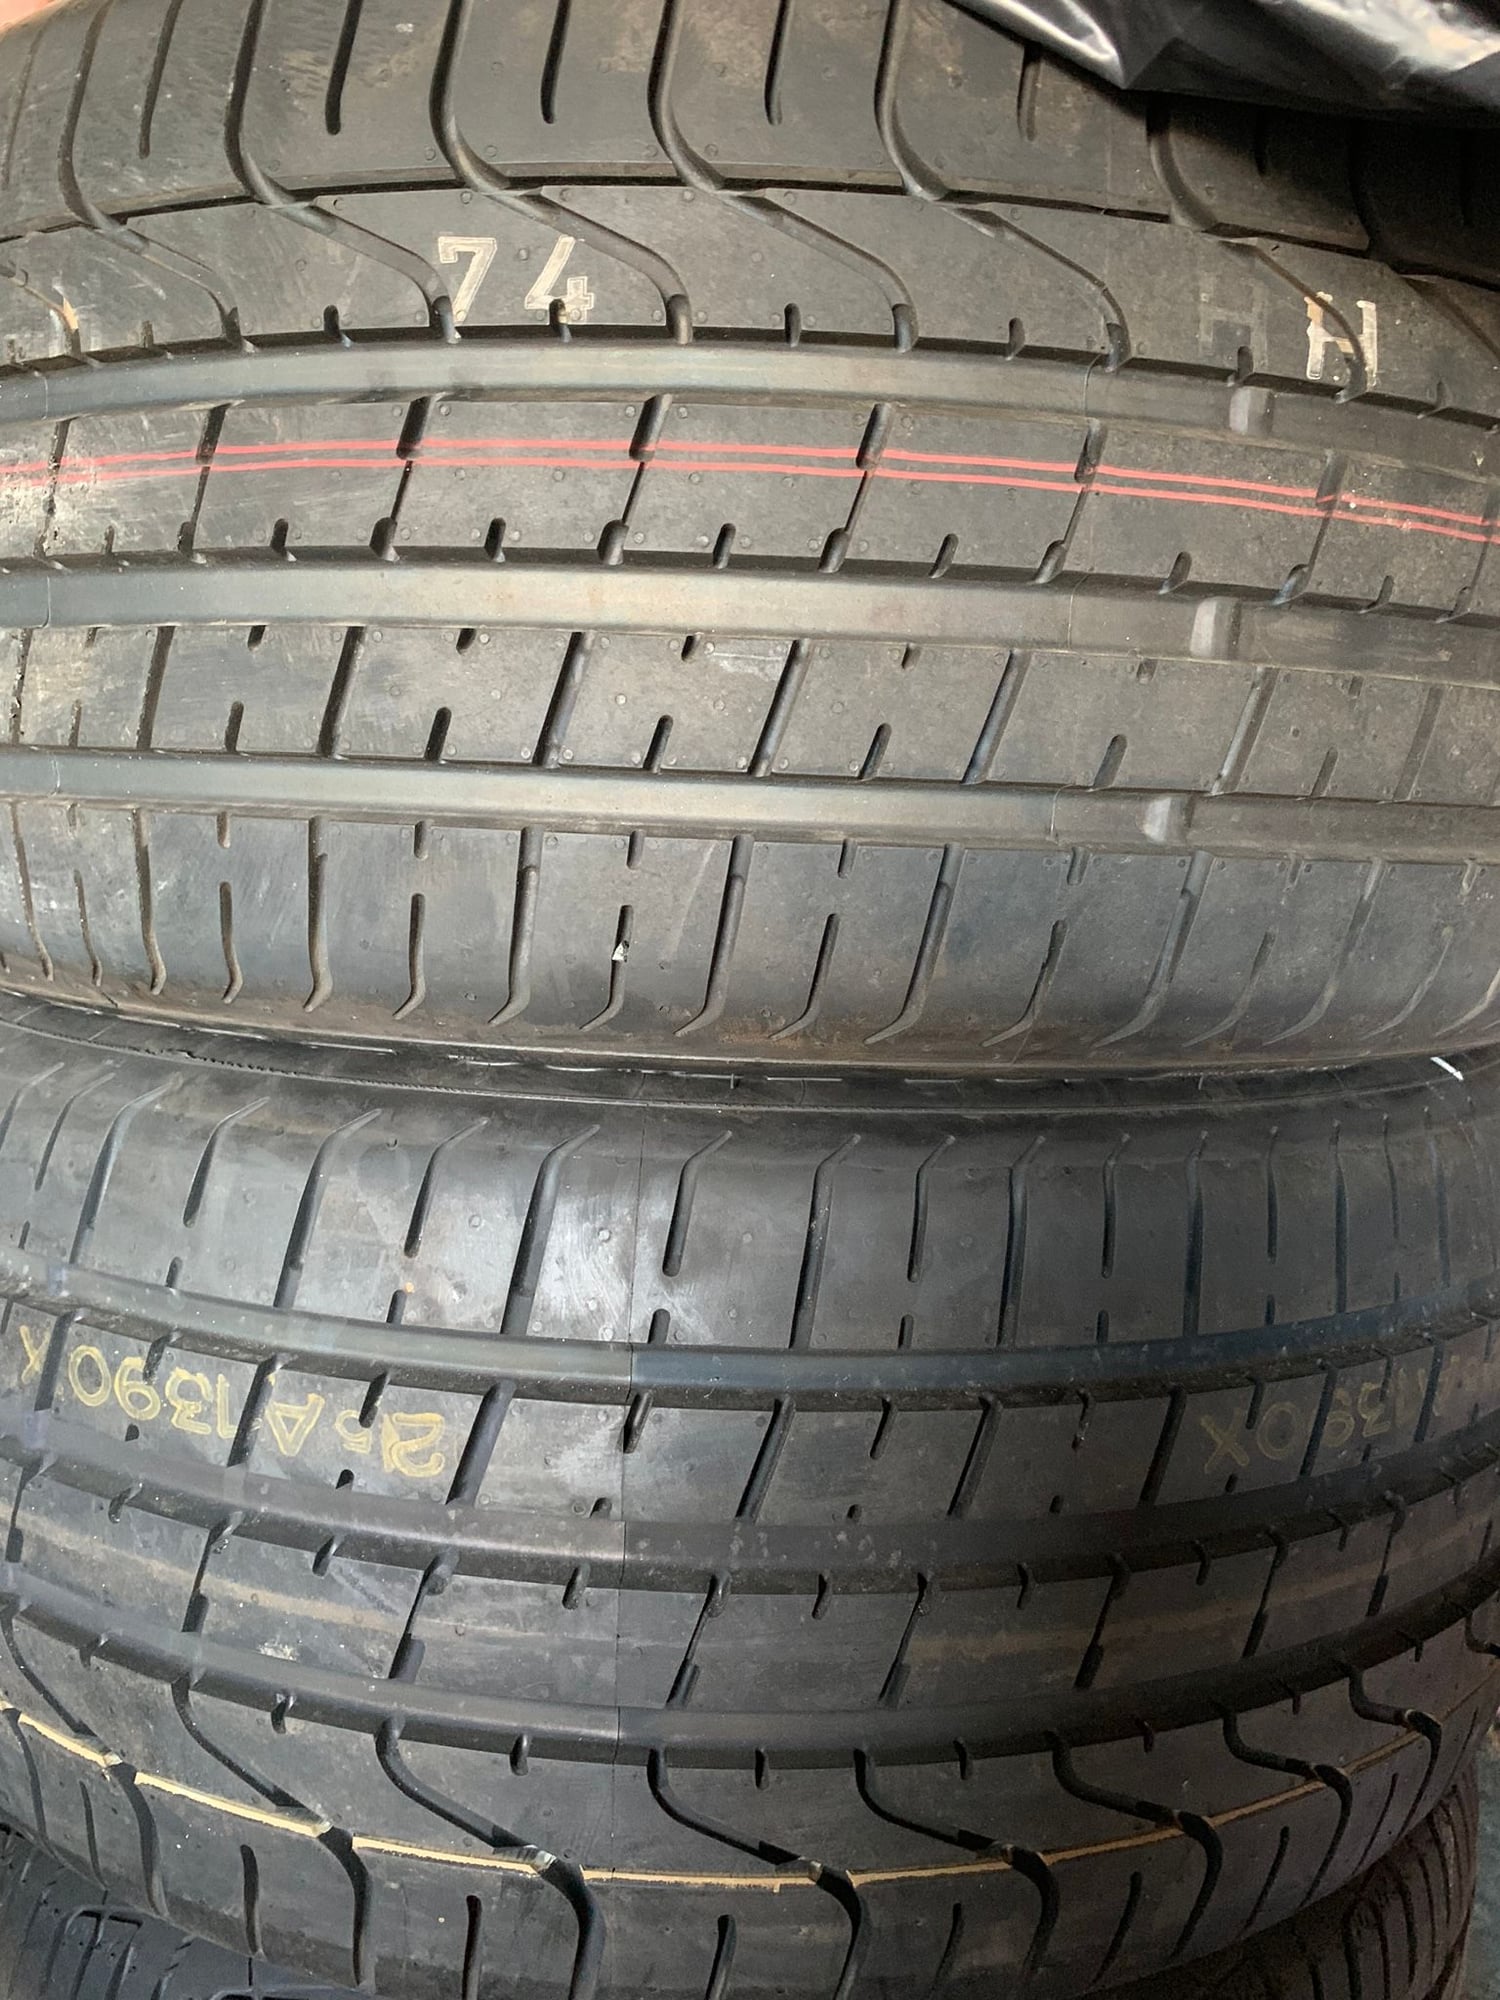 Wheels and Tires/Axles - Pair/two of New Pirelli P Zero 255/35/20ZR tires - Used - Gardena, CA 90247, United States